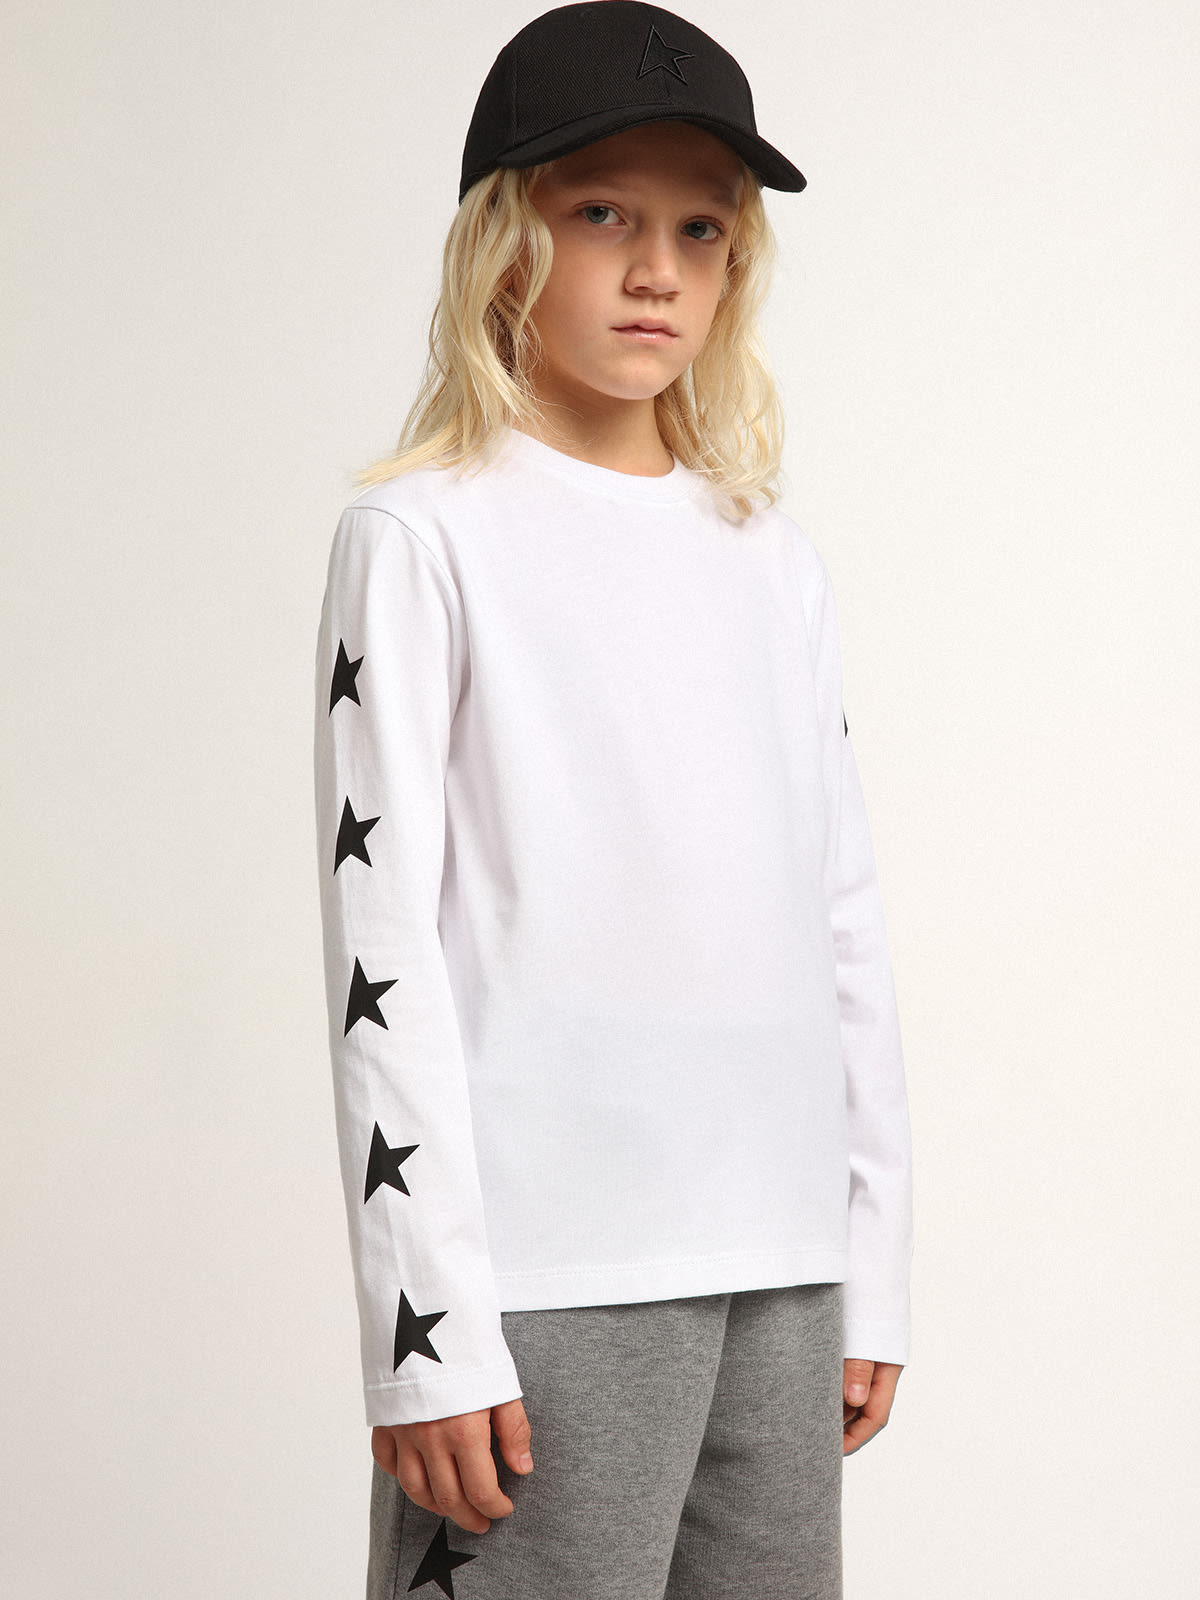 Golden Goose - White long-sleeved T-shirt with contrasting black stars in 